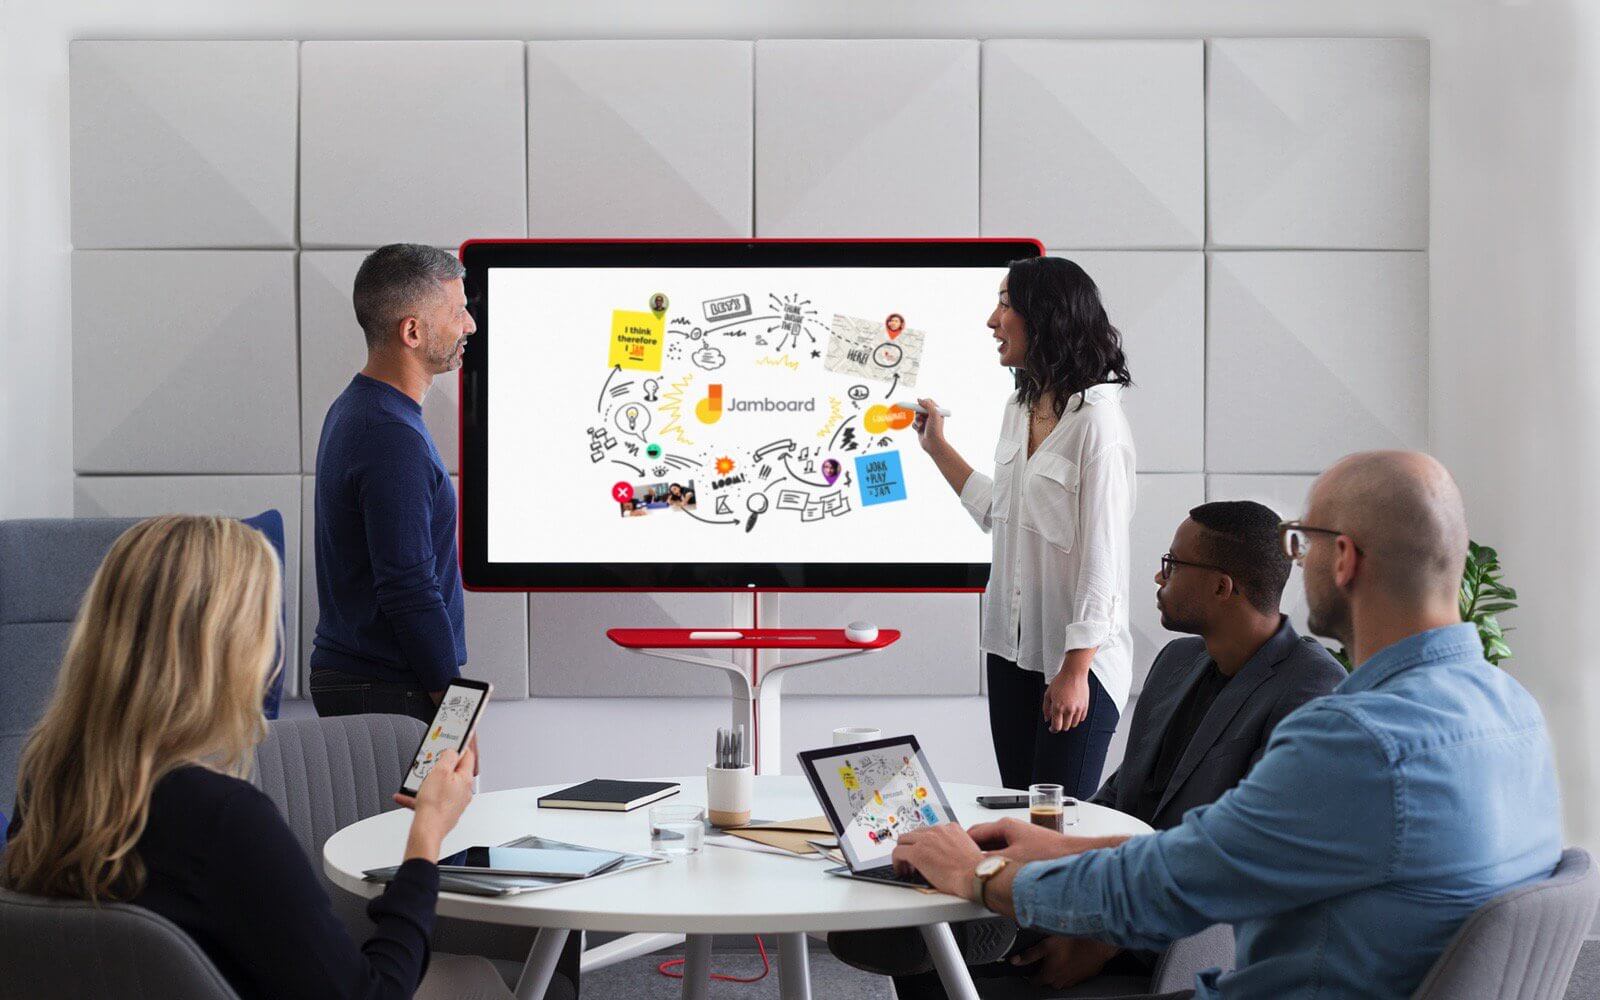 Google’s Jamboard is a 4K digital whiteboard for collaboration